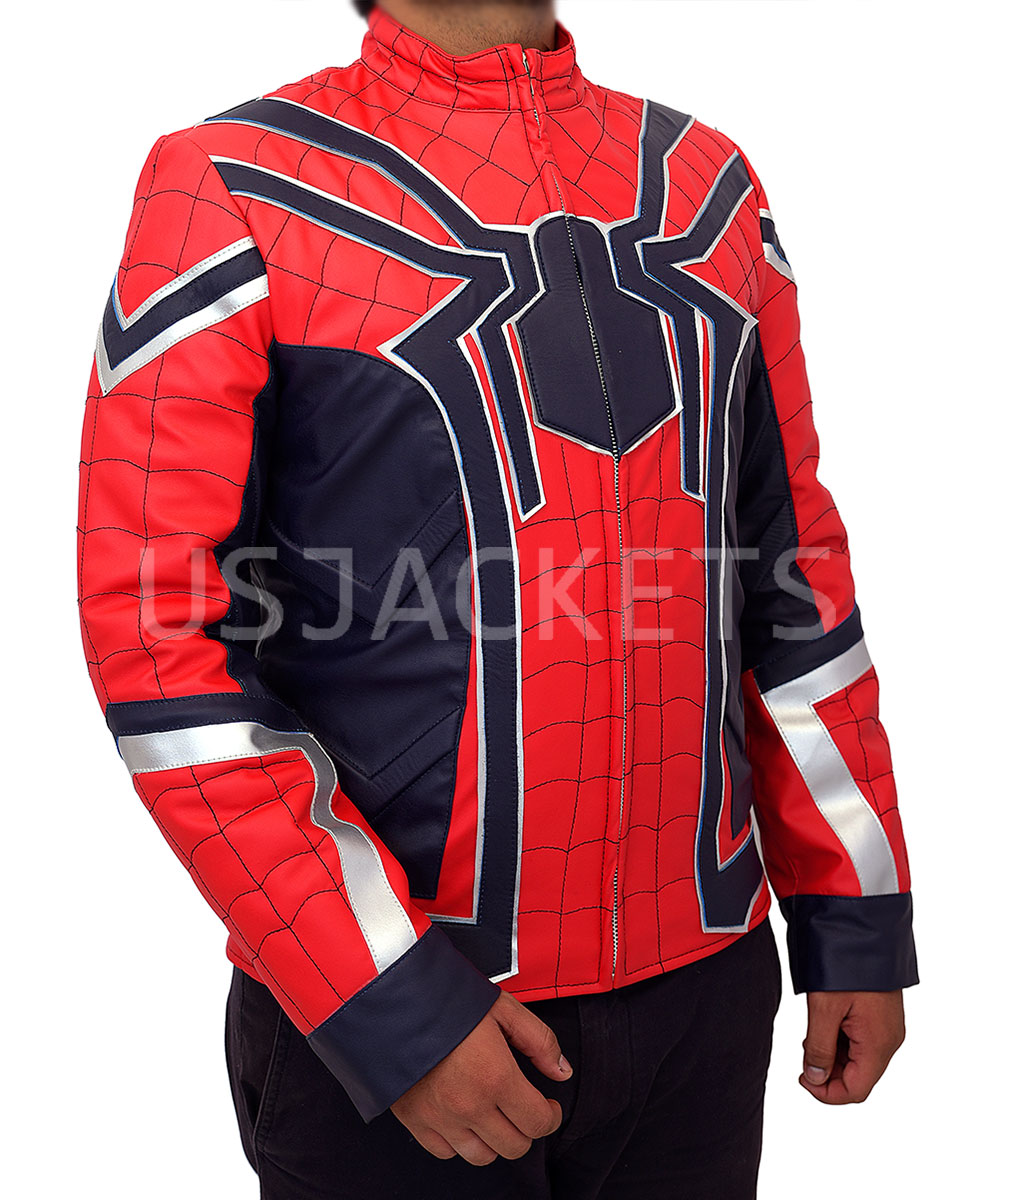 Spiderman Red Leather Jacket (1)